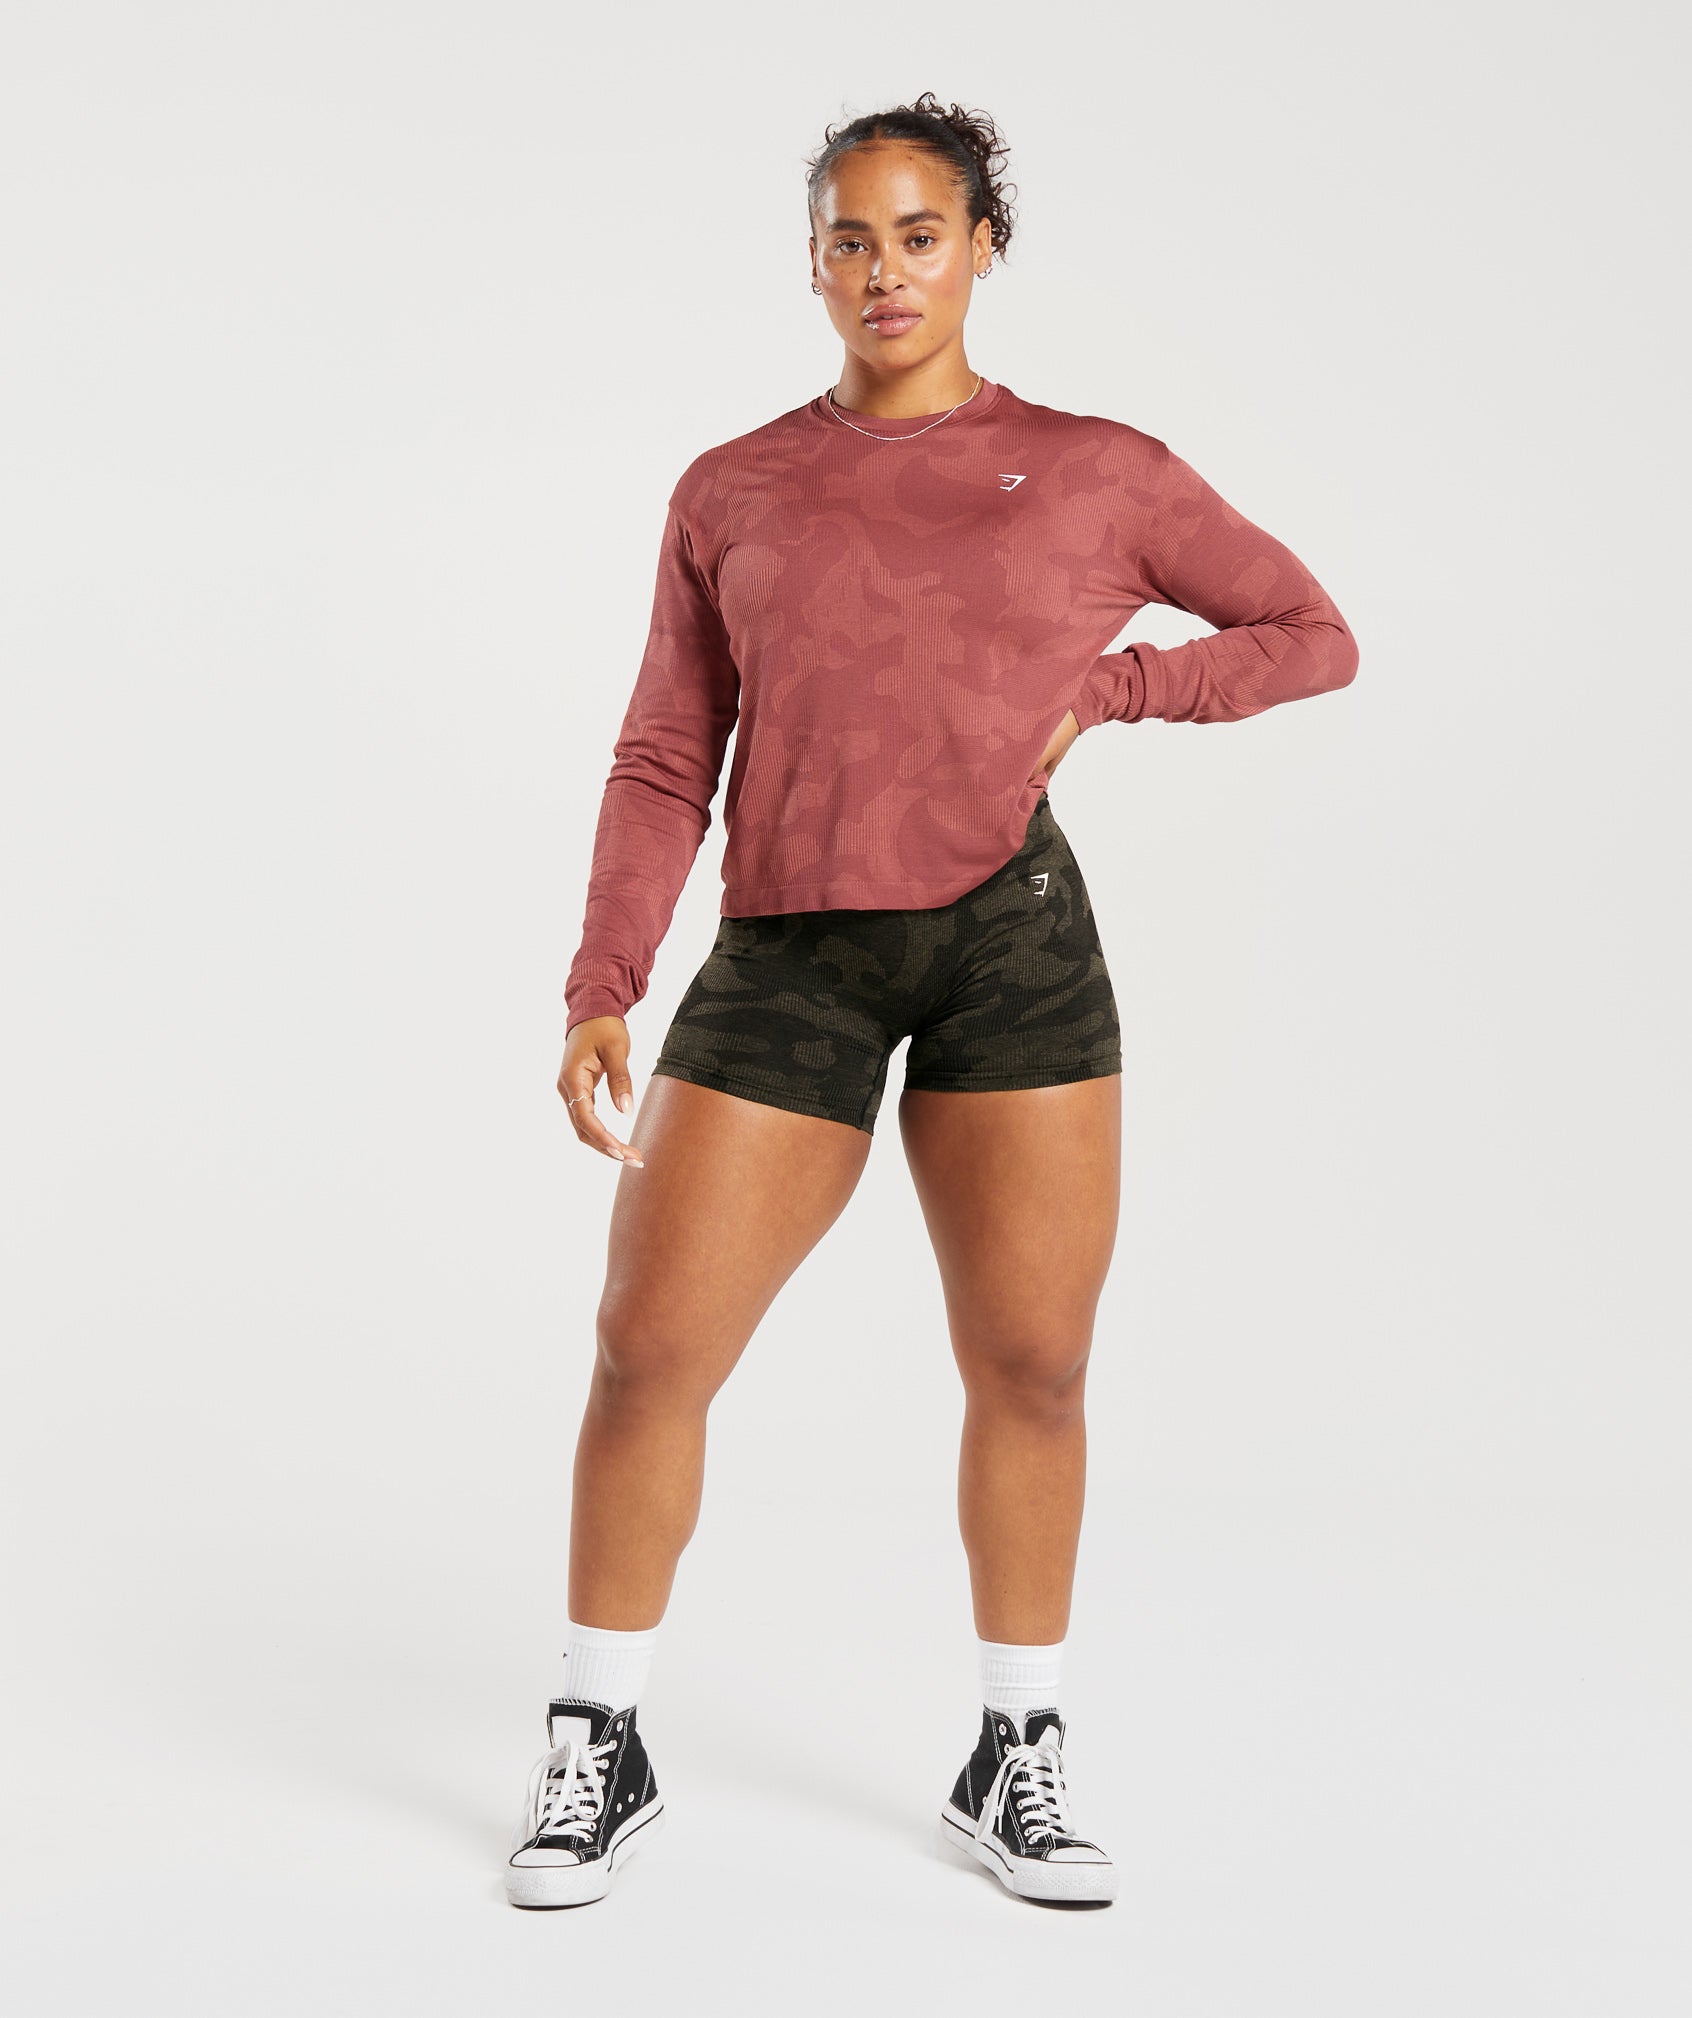 Adapt Camo Seamless Ribbed Long Sleeve Top in Soft Berry/Sunbaked Pink - view 4